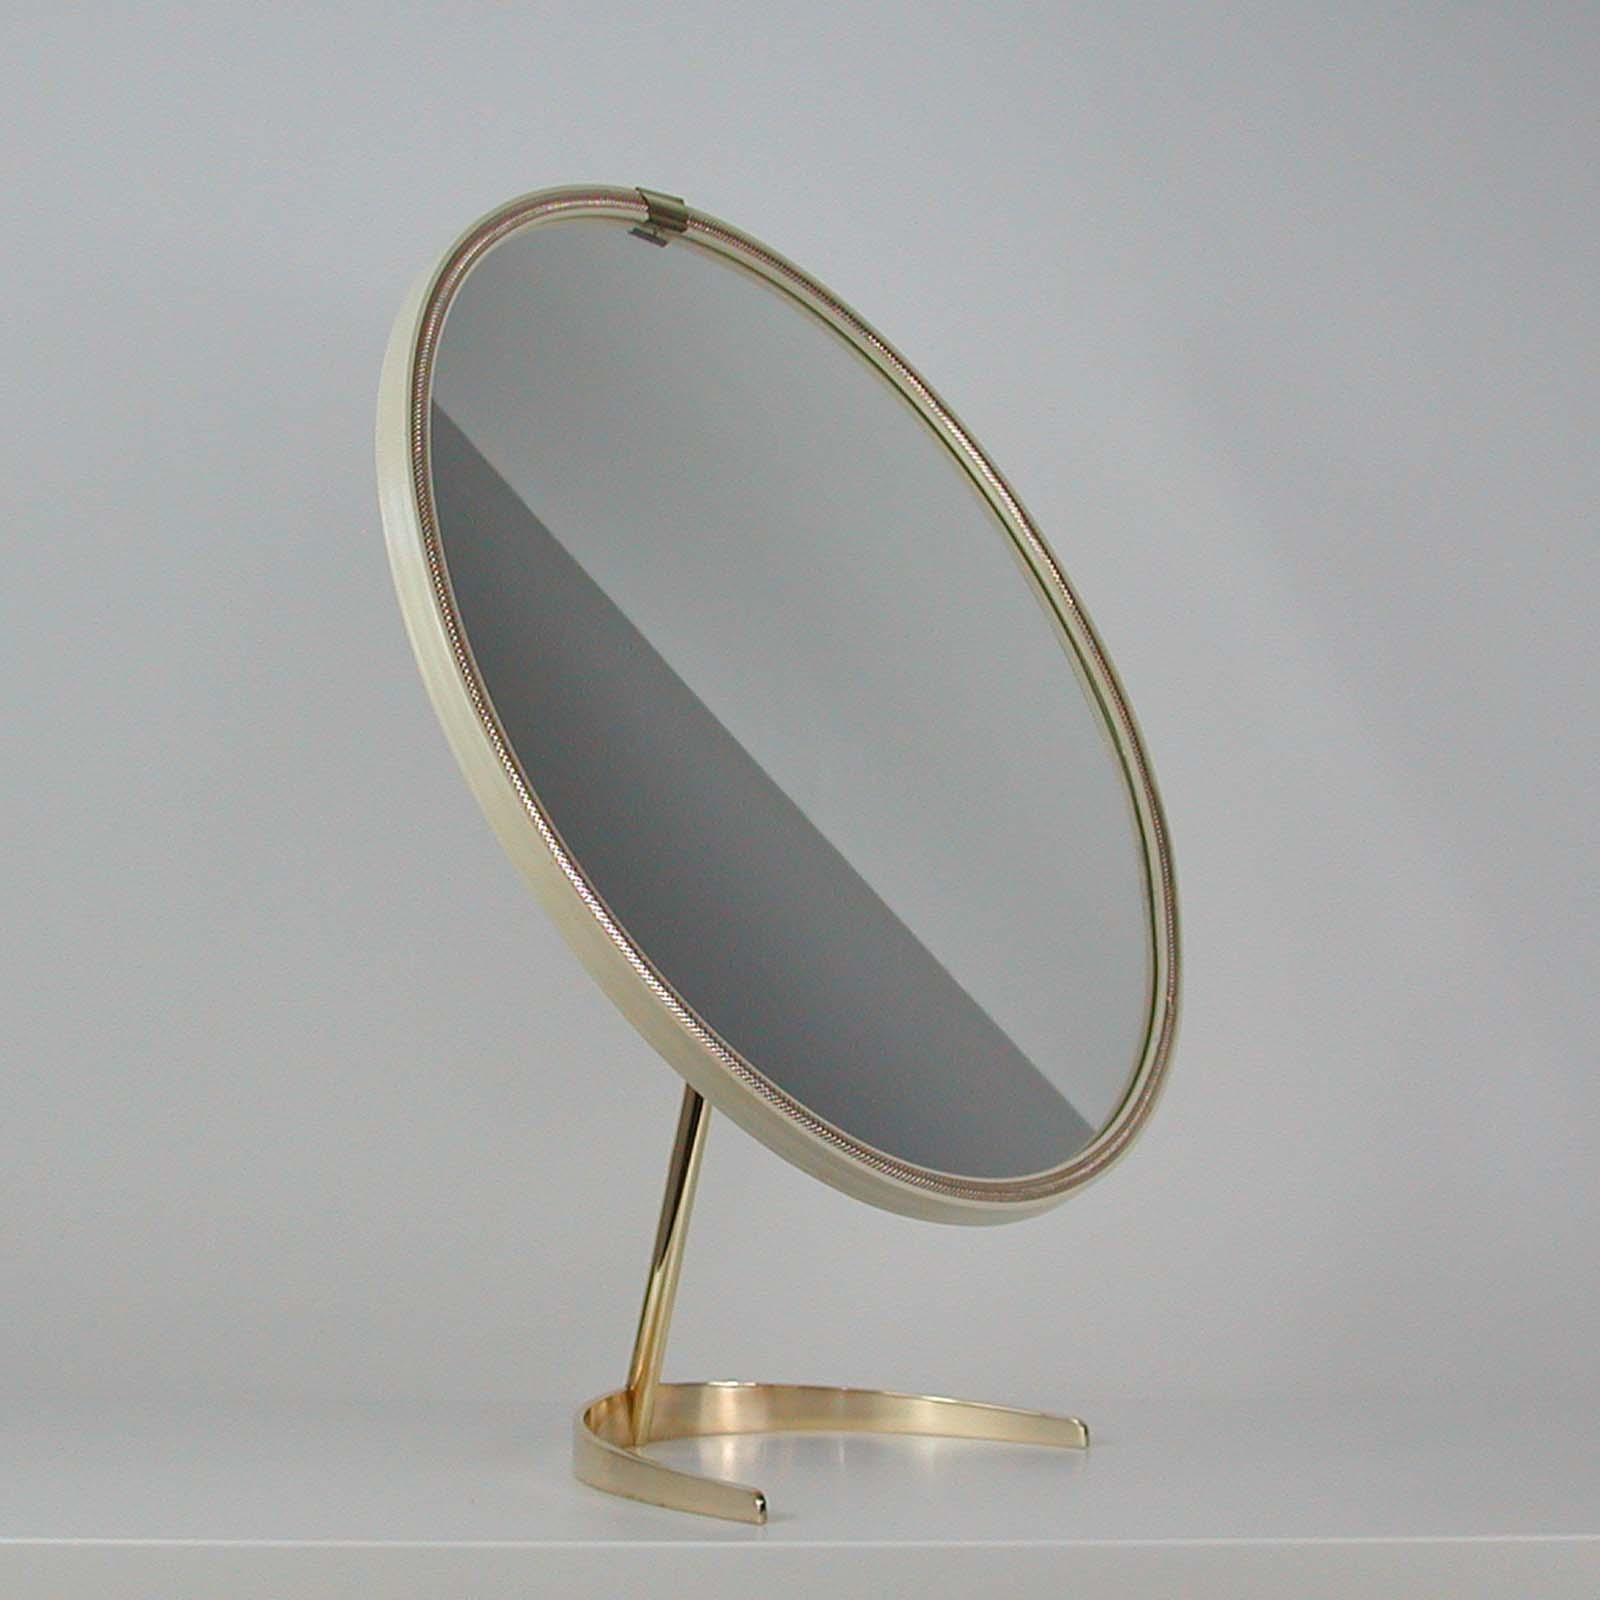 This awesome large vanity or table mirror was designed and manufactured in Germany in the 1950s by Vereinigte Werkstätten Munich. It features an off-white colored plastic frame with perforated brass decoration on a semicircular brass foot. The